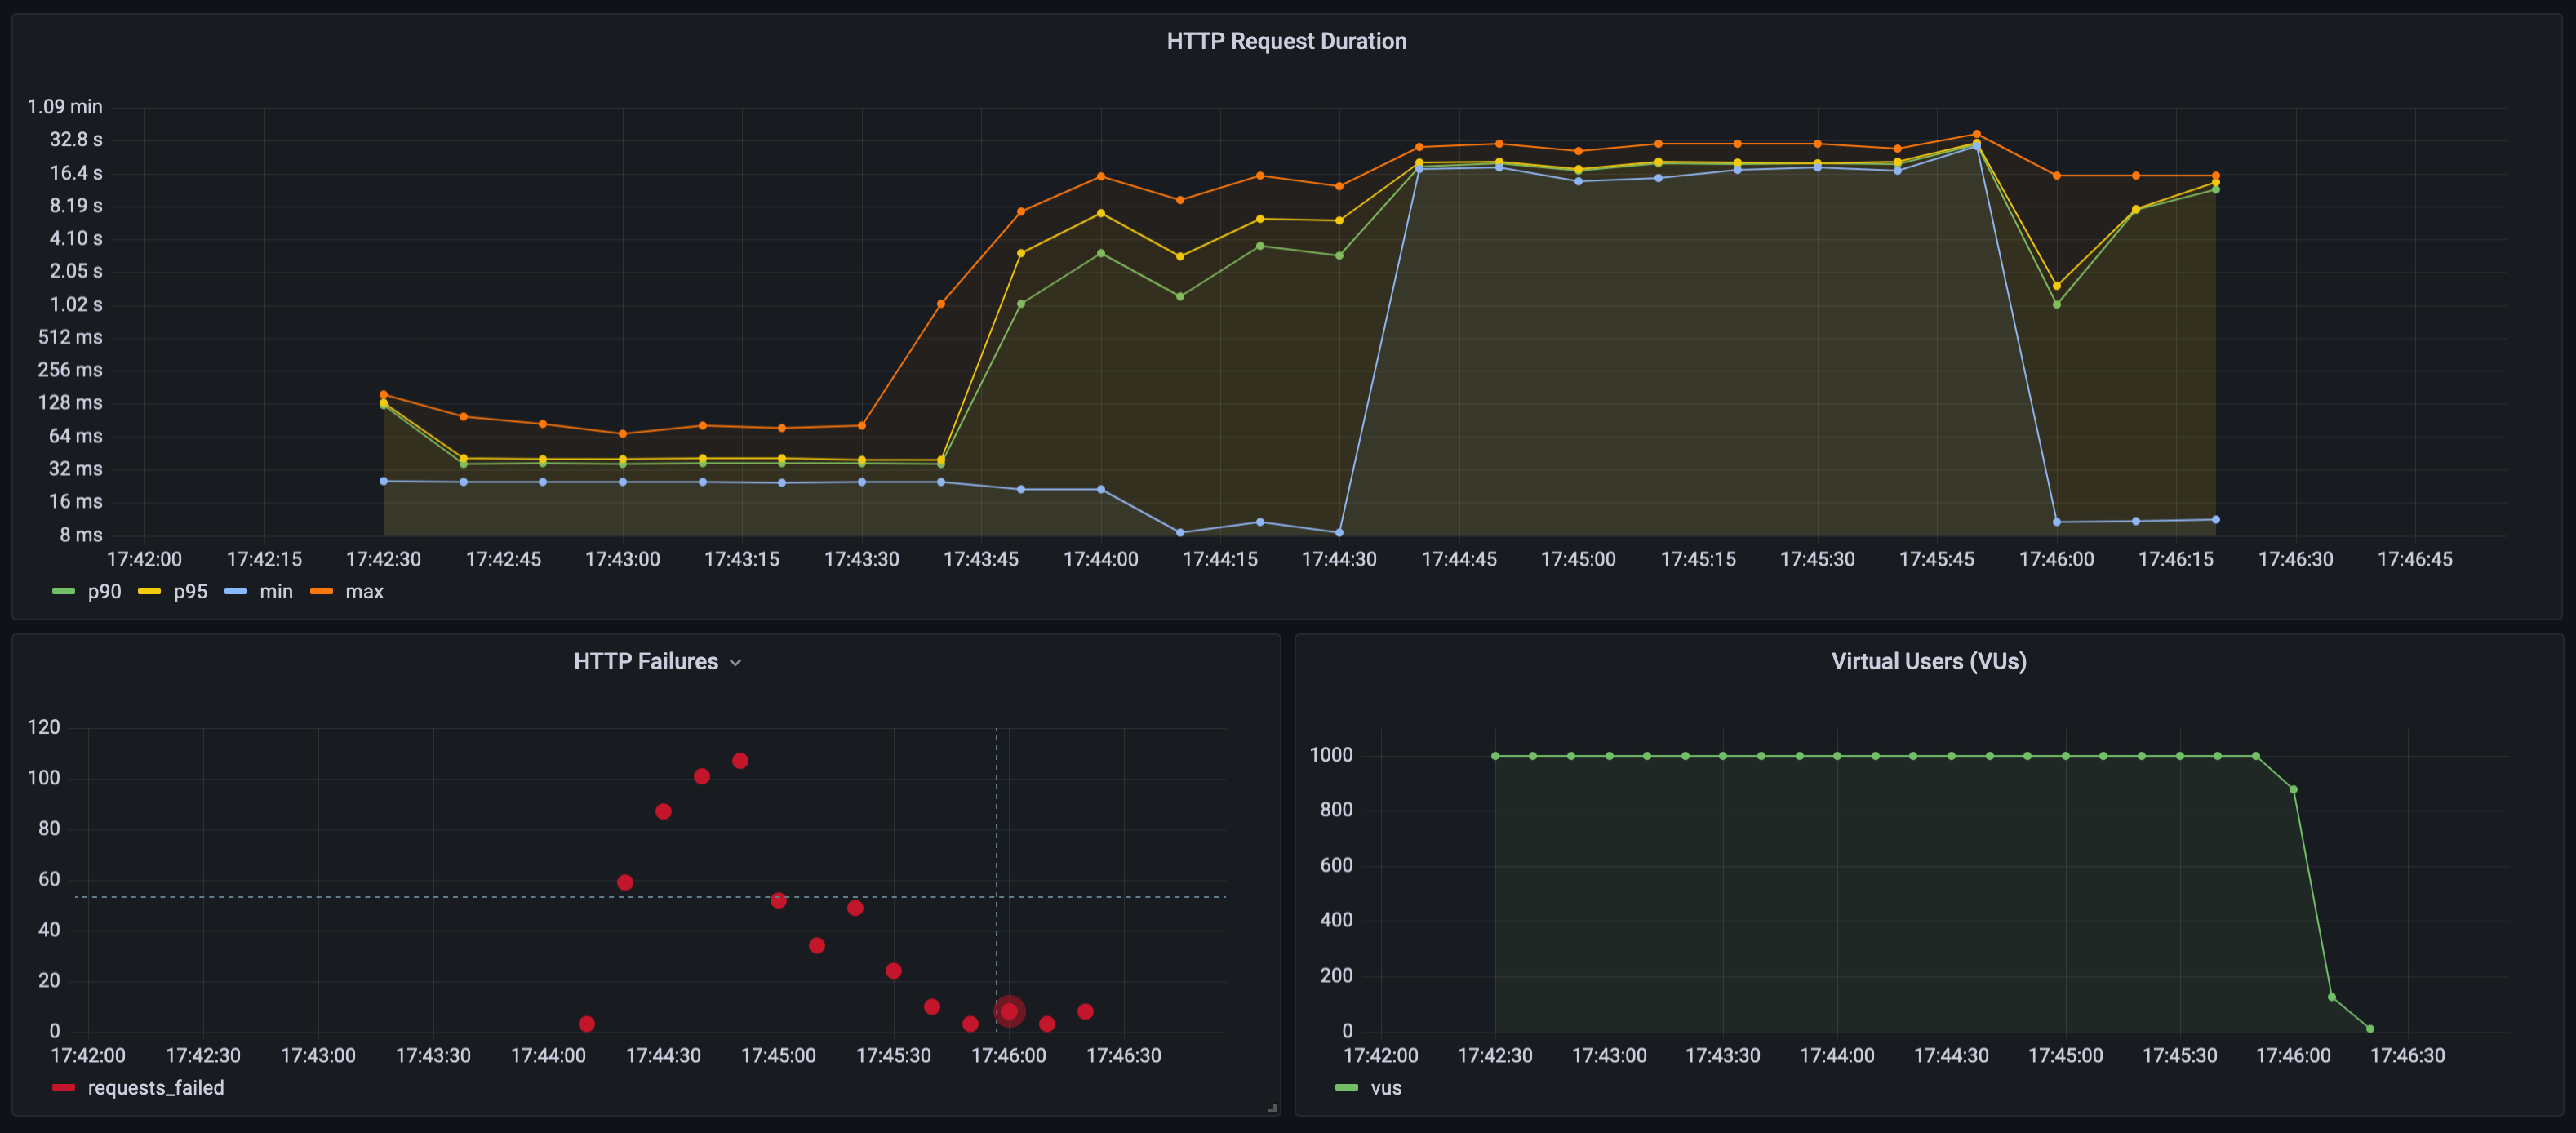 Figure 6.18 Bottom half of the Grafana dashboard showing three panels: HTTP Request Duration, HTTP Failures, and Virtual Users